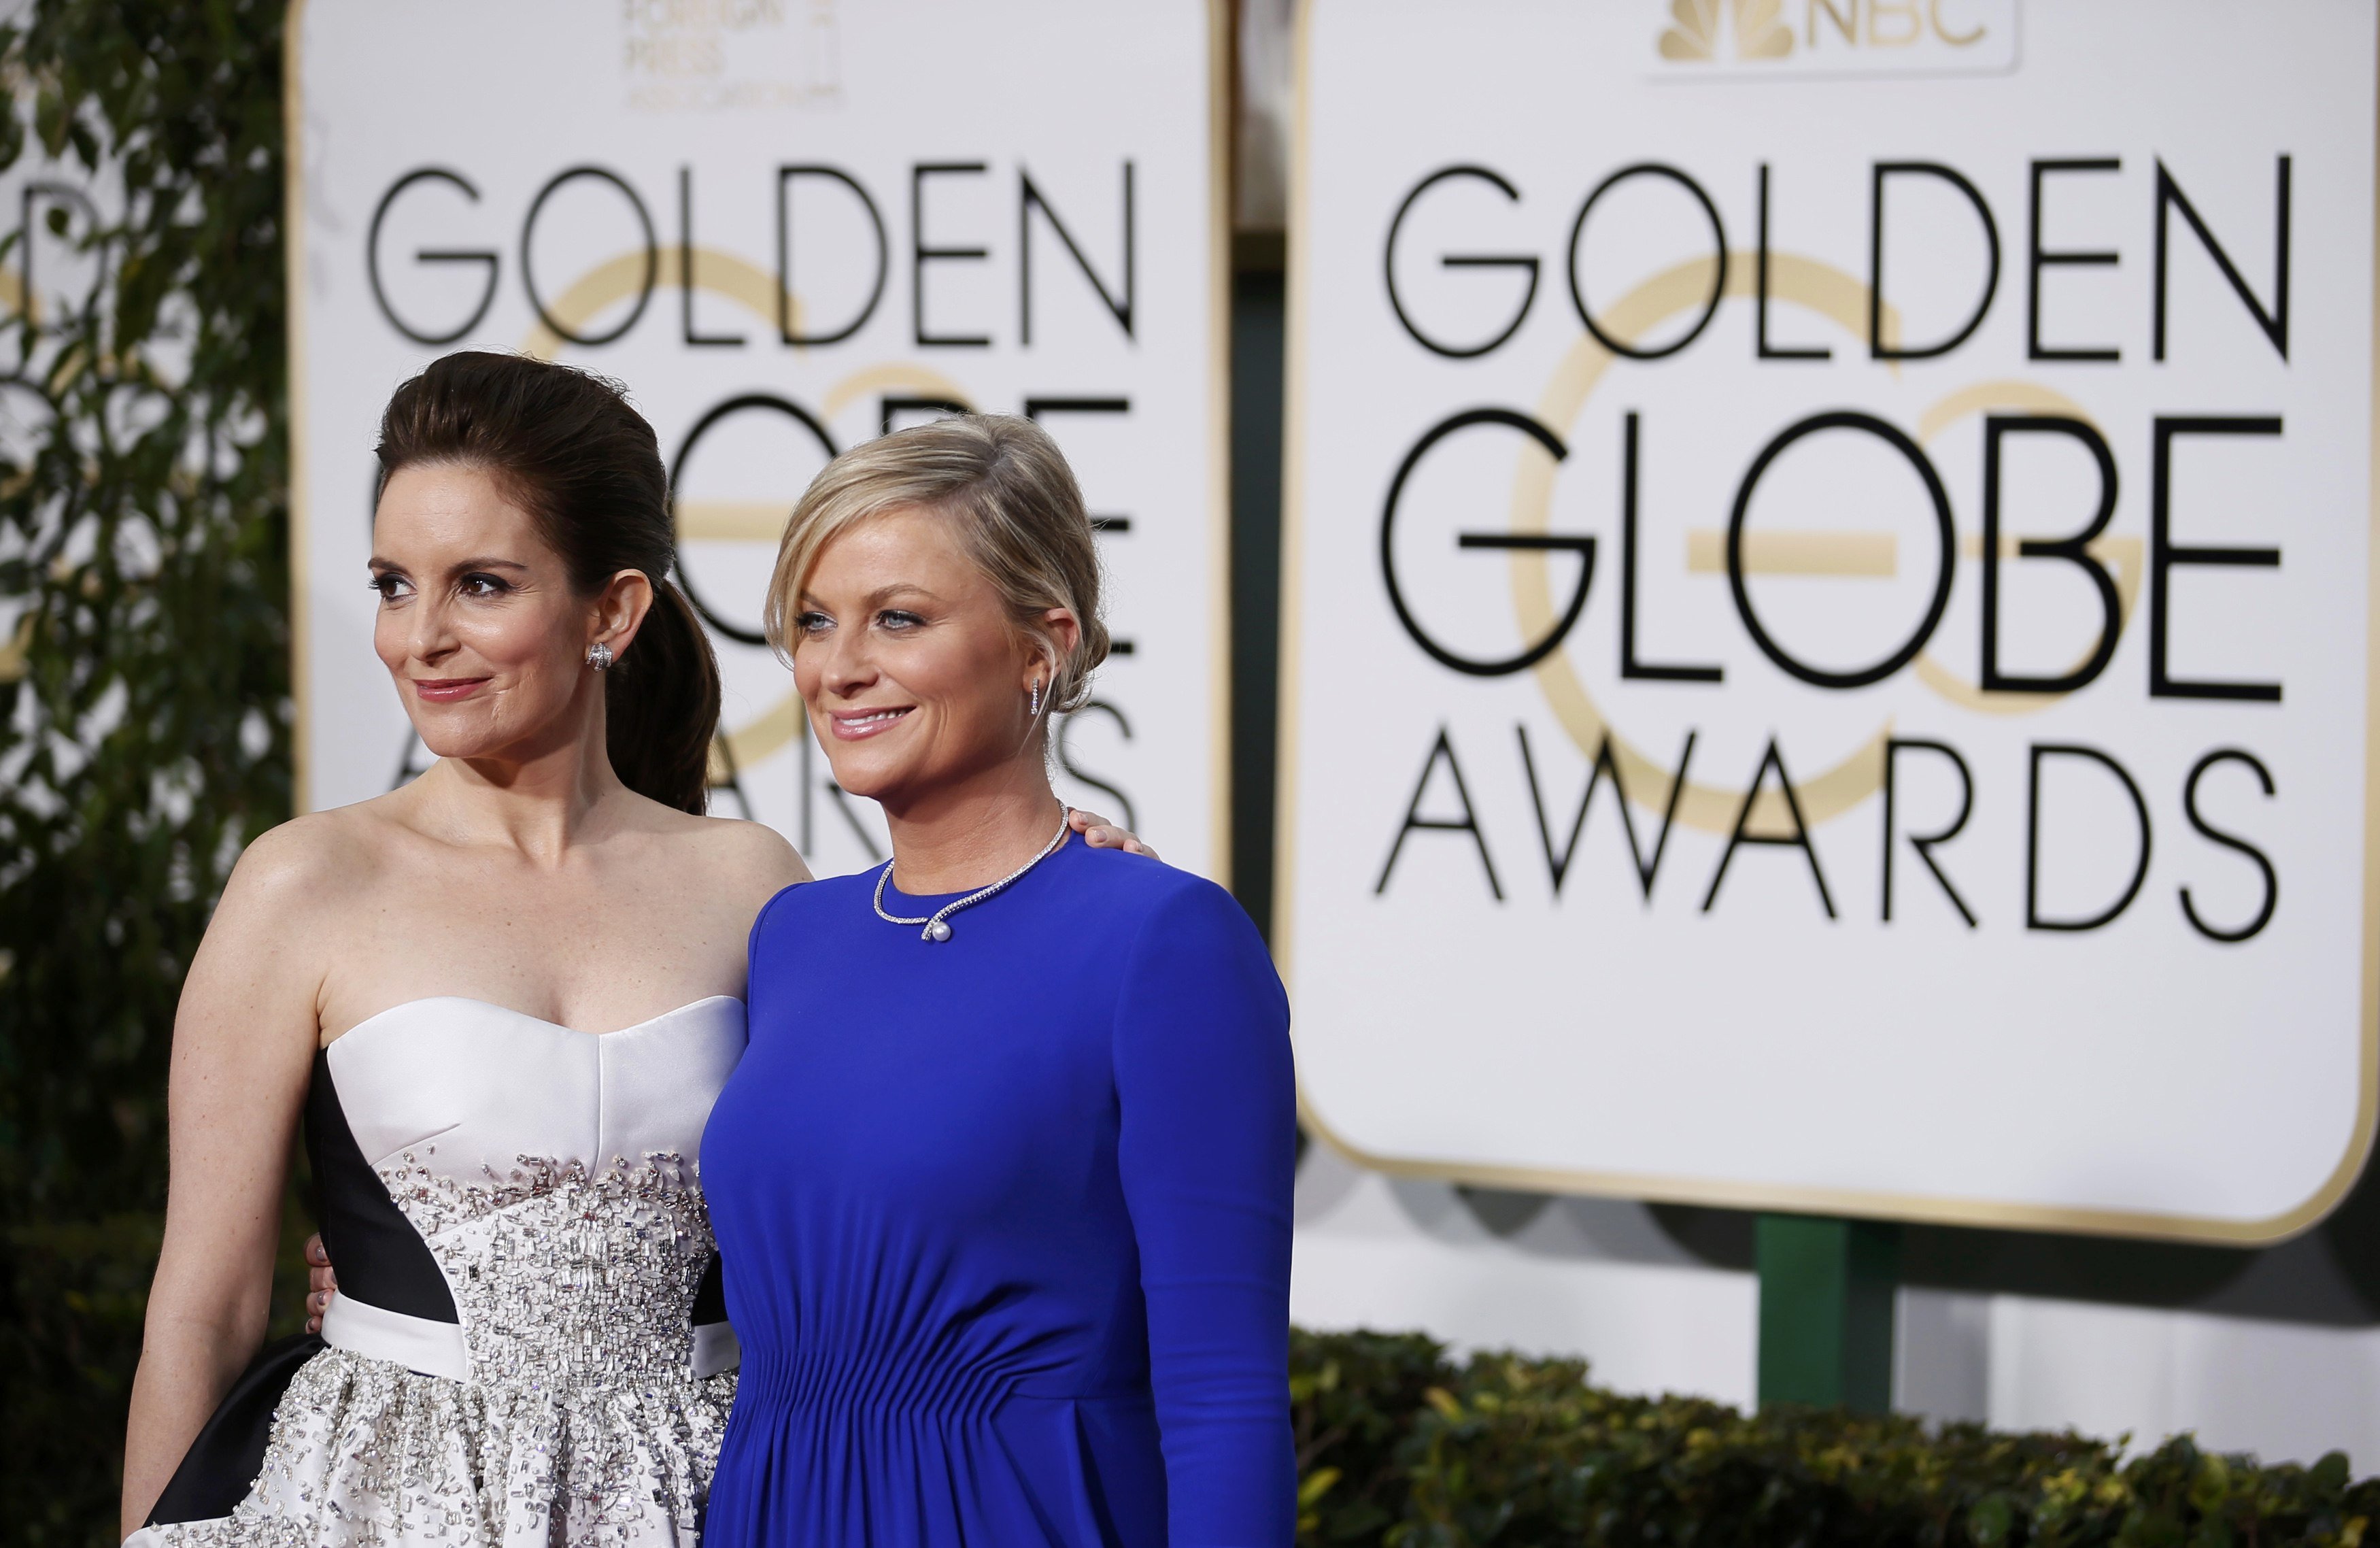 Show hosts Tina Fey and Amy Poehler arrive at the 72nd Golden Globe Awards in Beverly Hills on Jan. 11, 2015. (Danny Moloshok—Reuters)